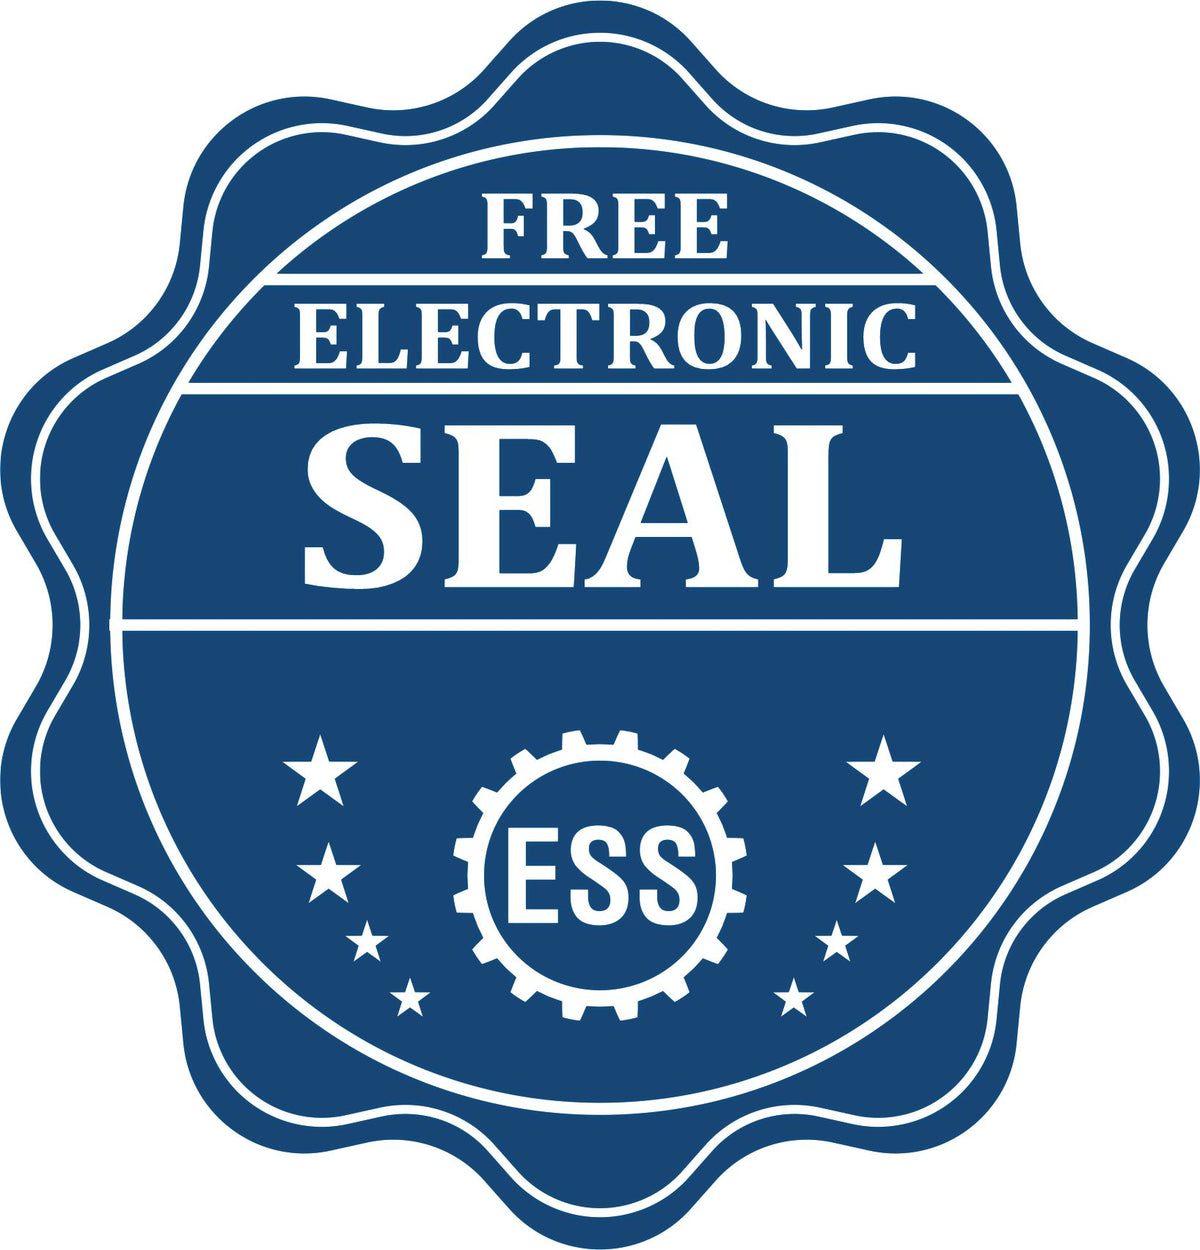 A badge showing a free electronic seal for the Extended Long Reach Florida Surveyor Embosser with stars and the ESS gear on the emblem.